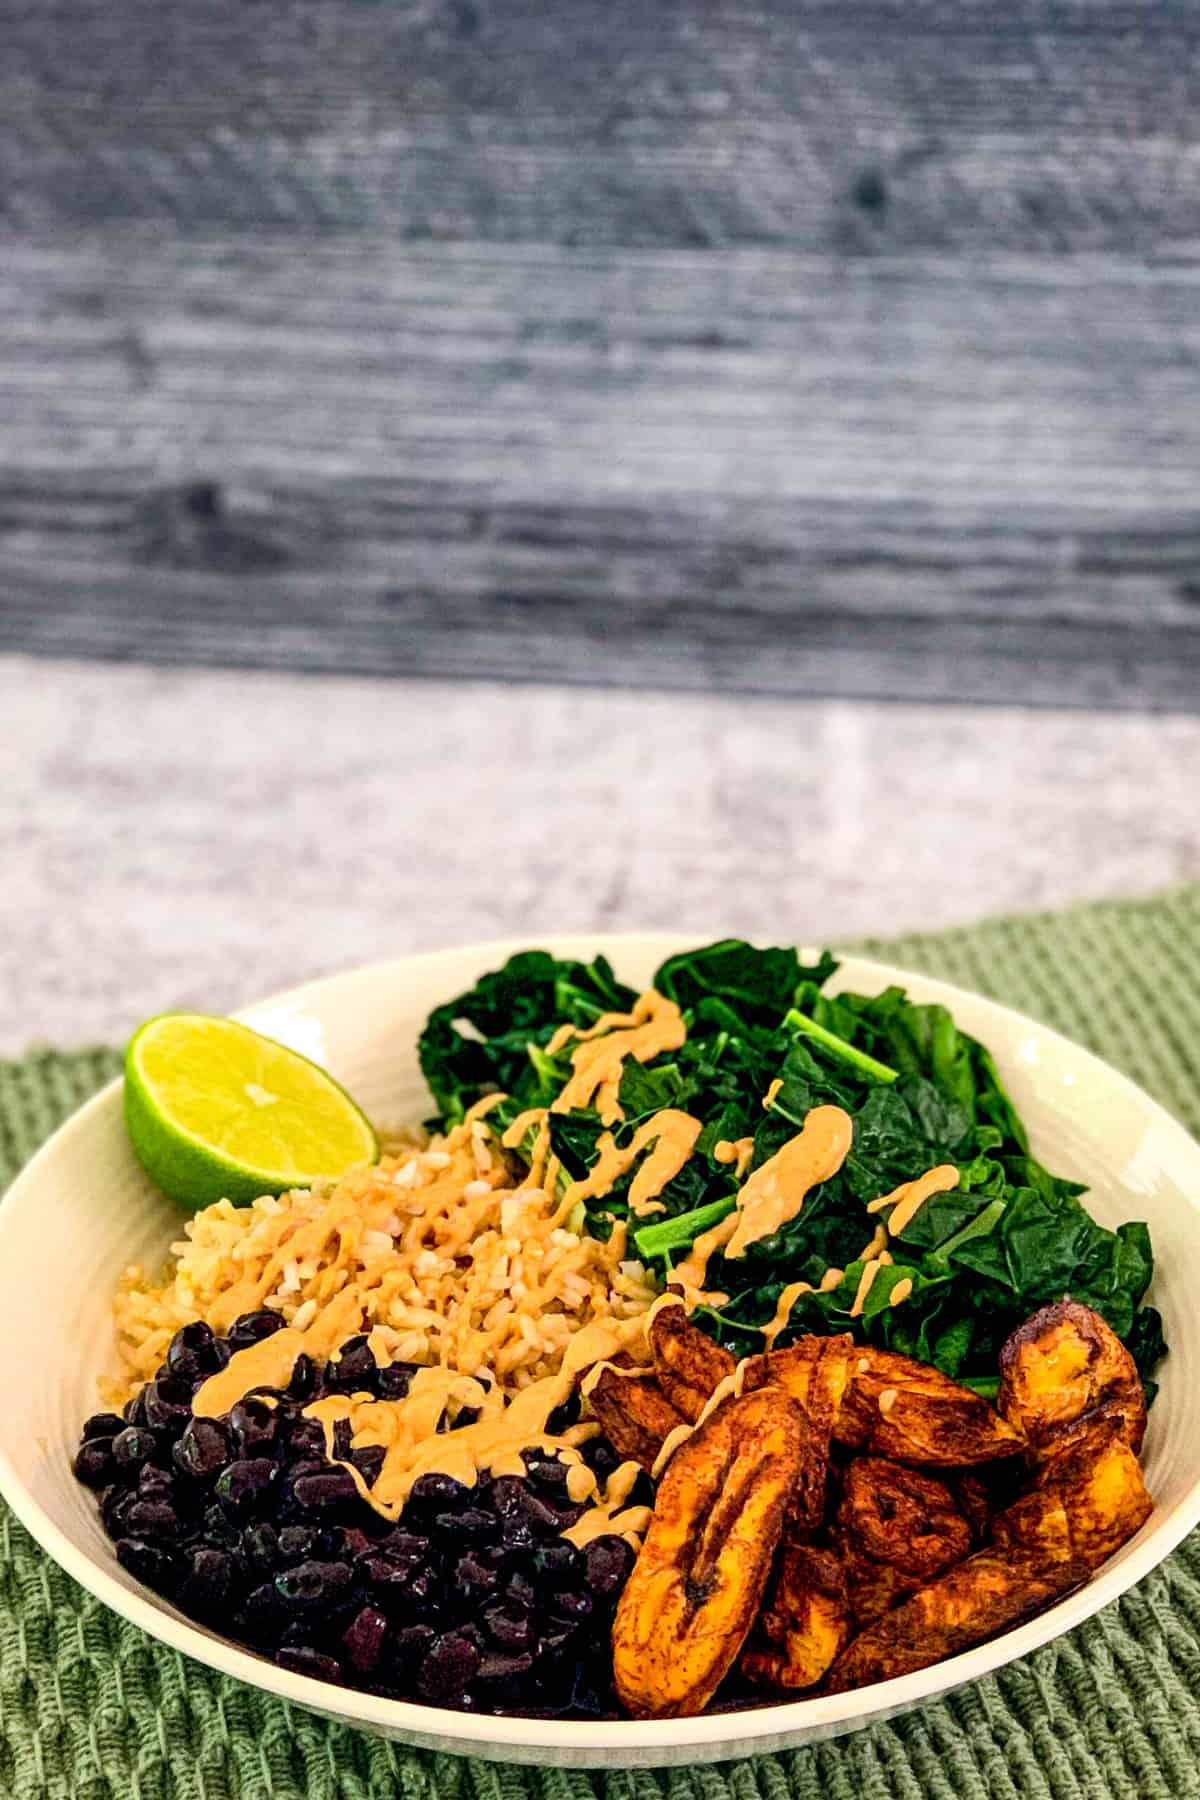 top side view of black bean buddha bowl with black beans, plantains, kale, brown rice and lime wedge in a white bowl on a green placemat with gray background.